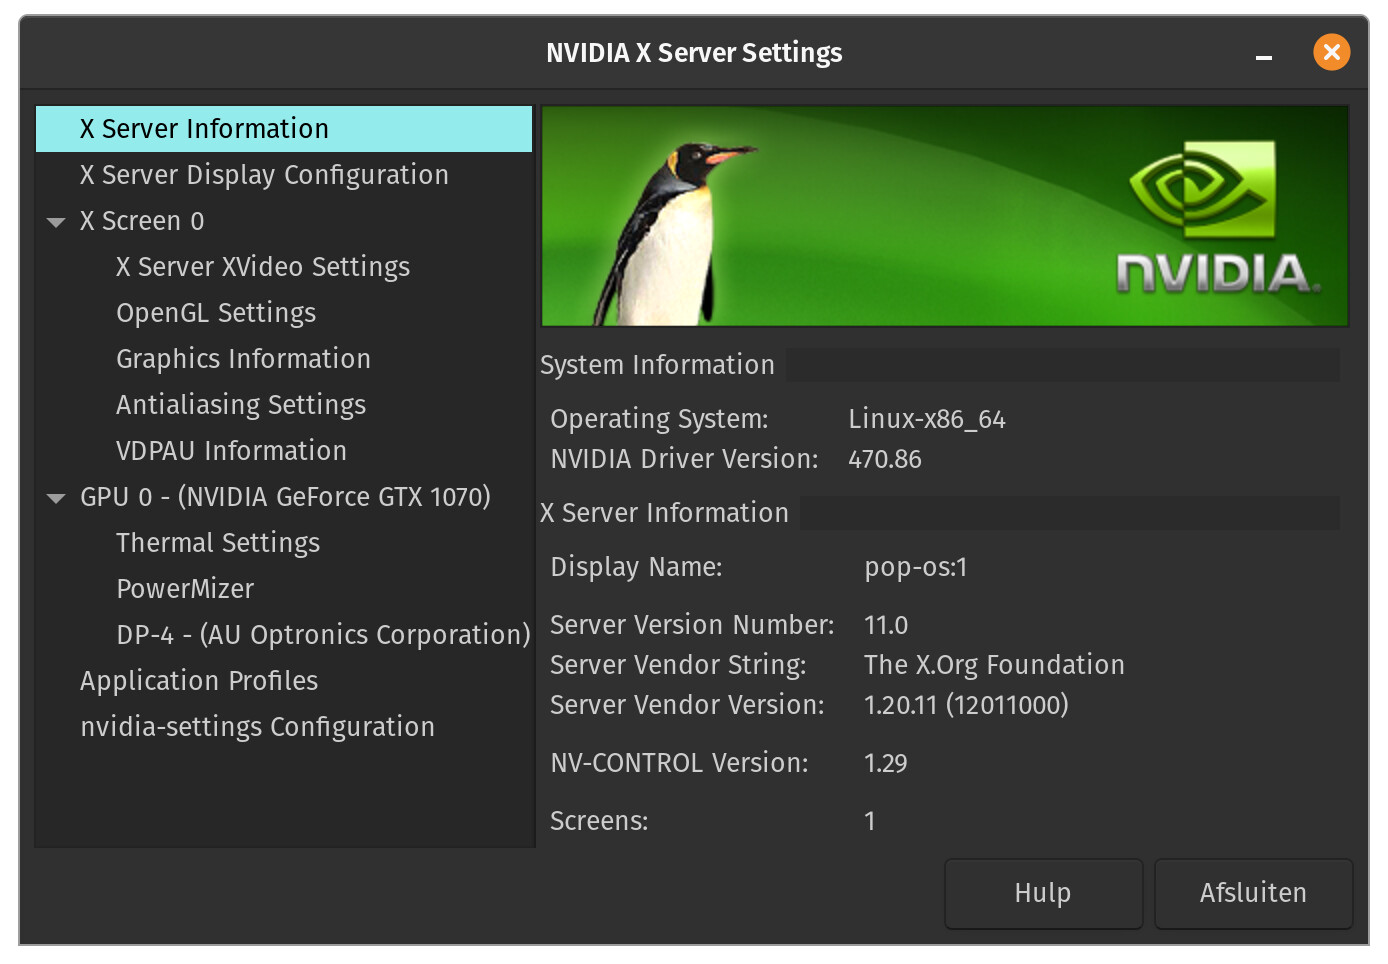 How To Install The Latest Nvidia Driver On Zorin Os 16 Pop Os 21 04 Tutorials Guides Zorin Forum